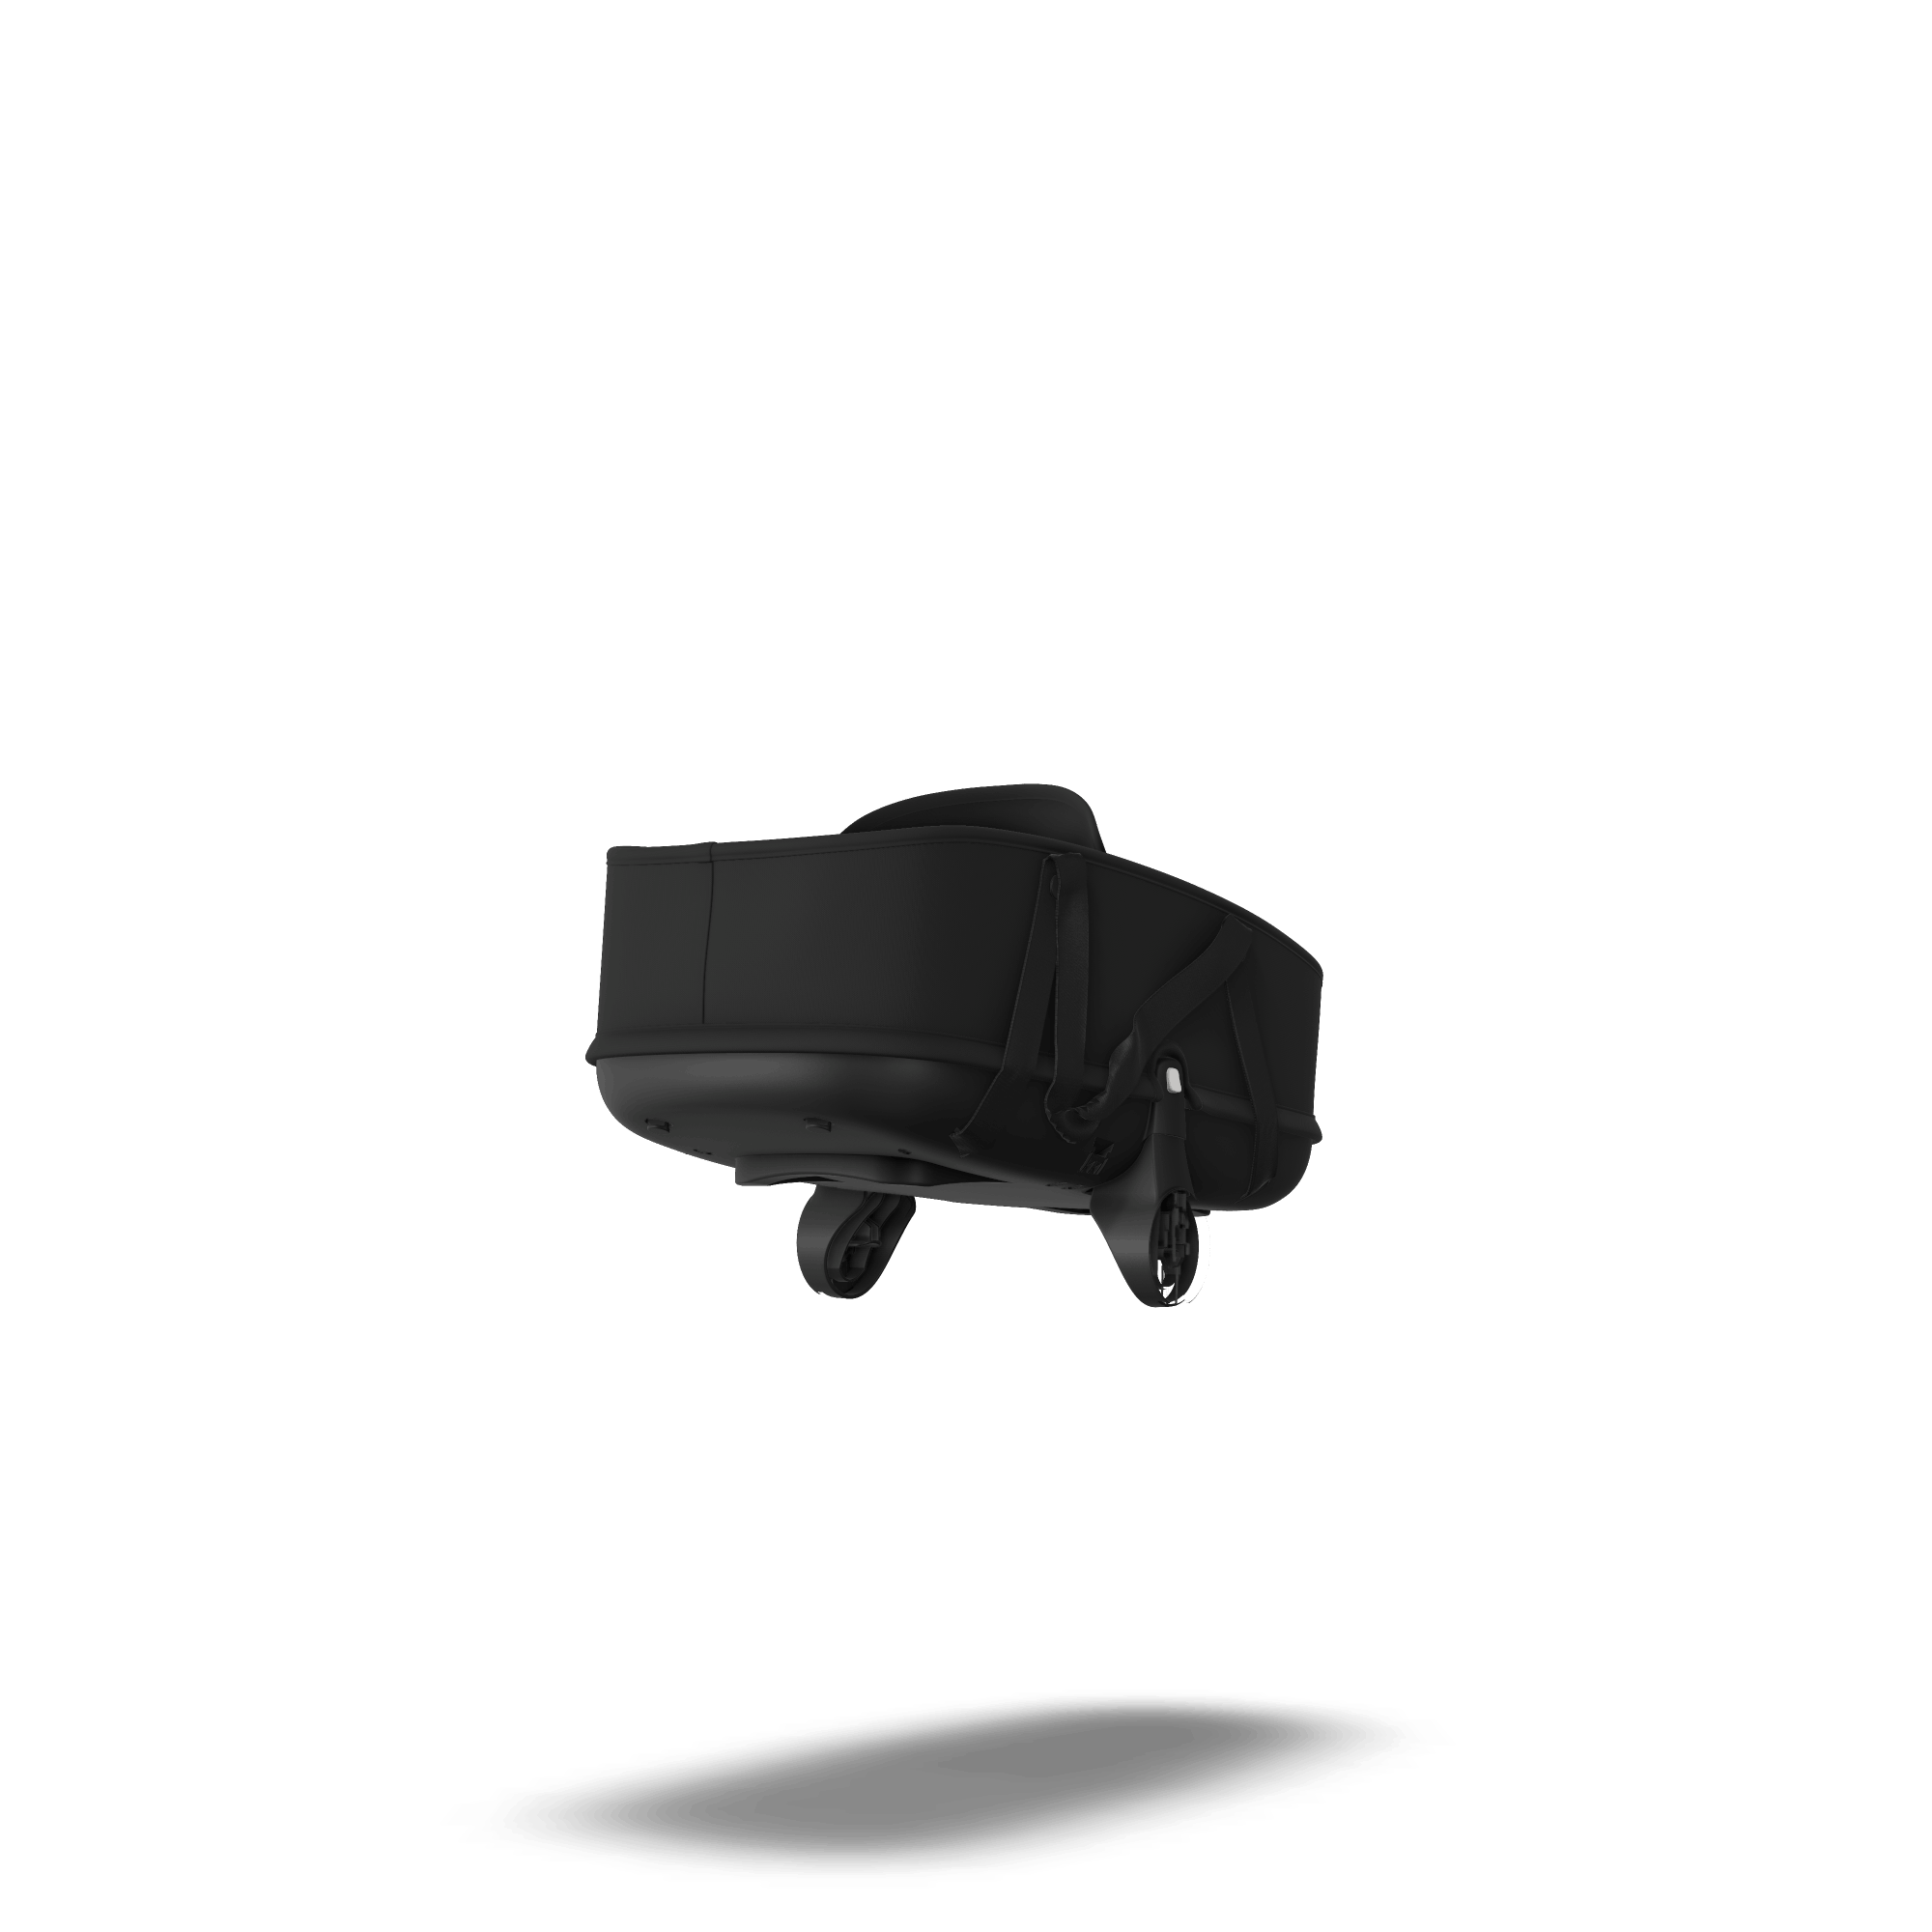 bugaboo bee 5 with carrycot